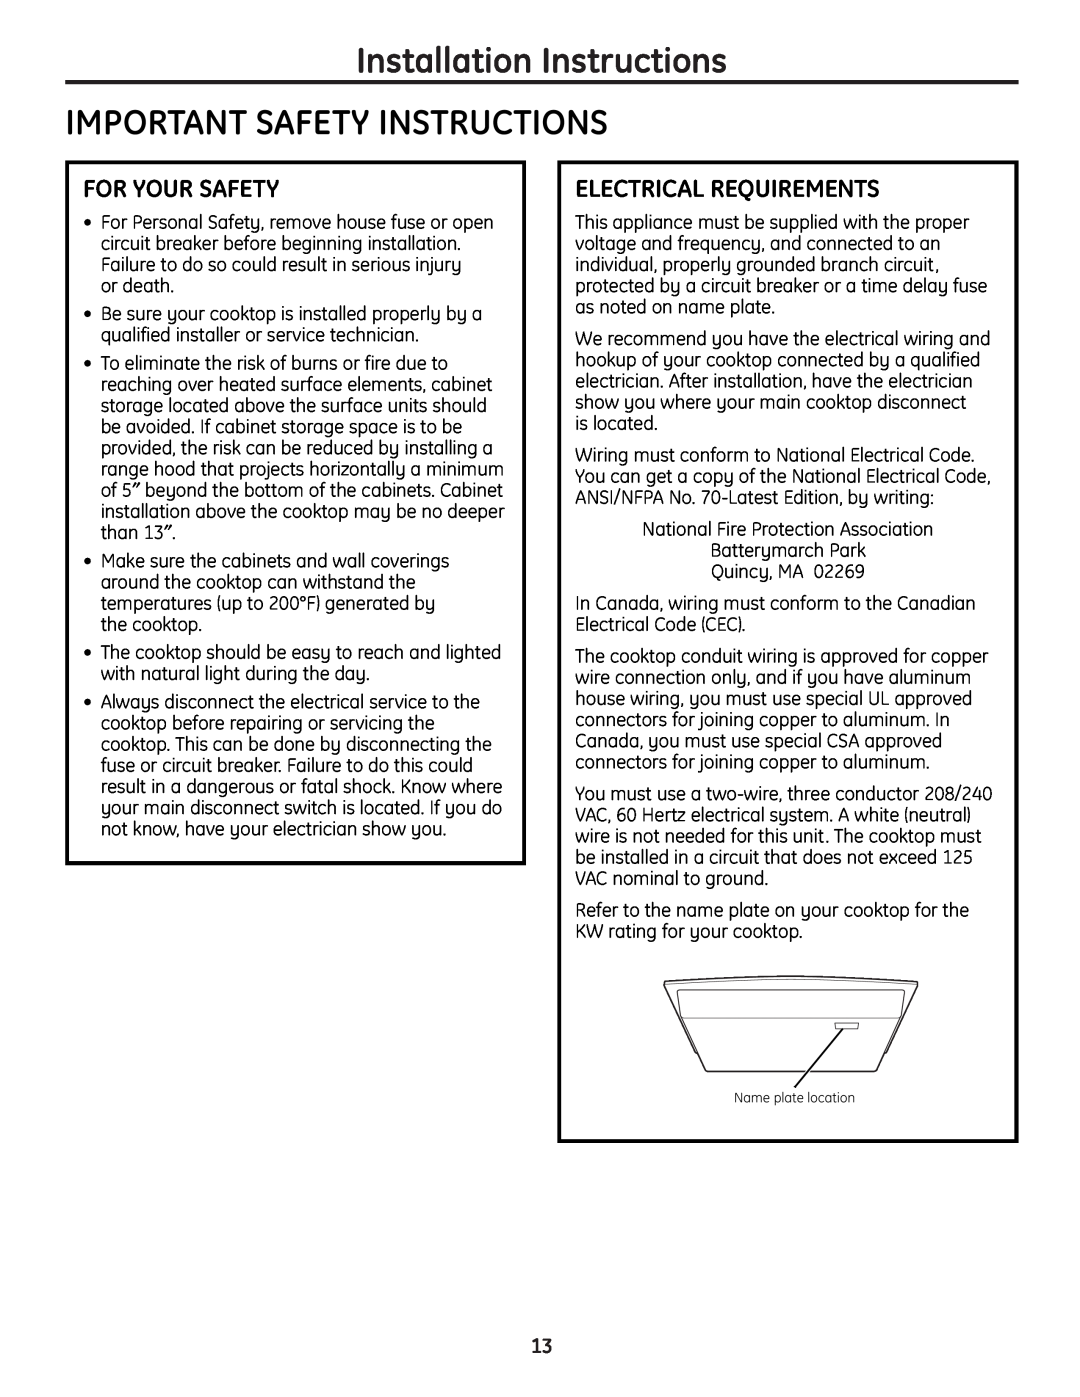 GE JP256 Installation Instructions IMPORTANT SAFETY INSTRUCTIONS, For Your Safety, Electrical Requirements 